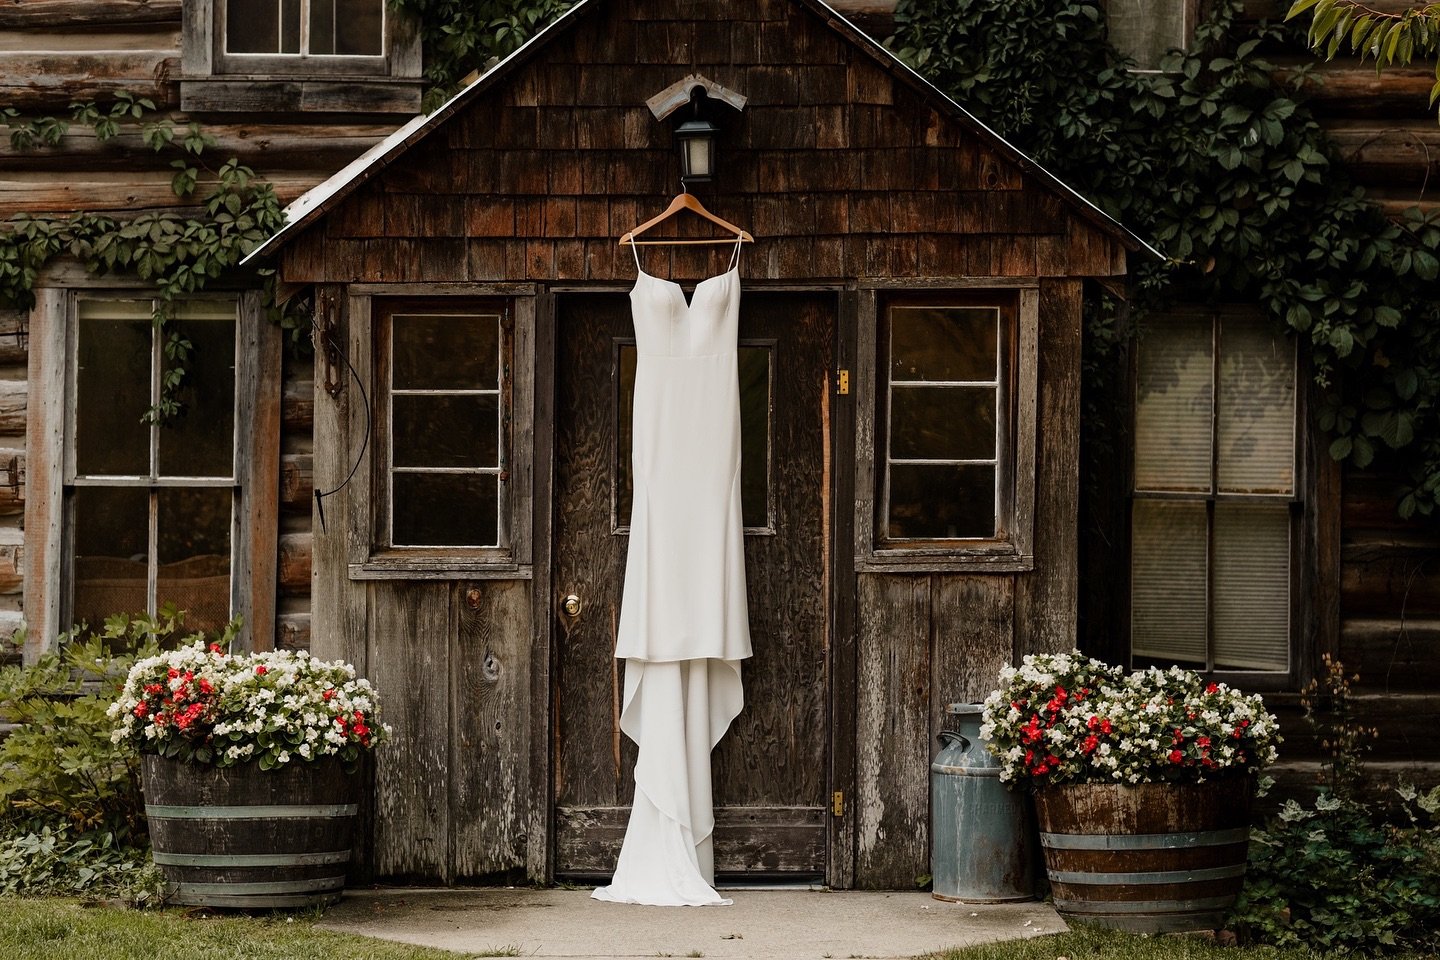 Can&rsquo;t wait to see all the beautiful dresses my brides choose this summer! If you still need a wedding dress, here are some of my favorite shops!

Sweetheart Bridal: Wenatchee, WA @sweetheart_bridal 

Bella Sera: Wenatchee, WA @bella.sera.wenatc